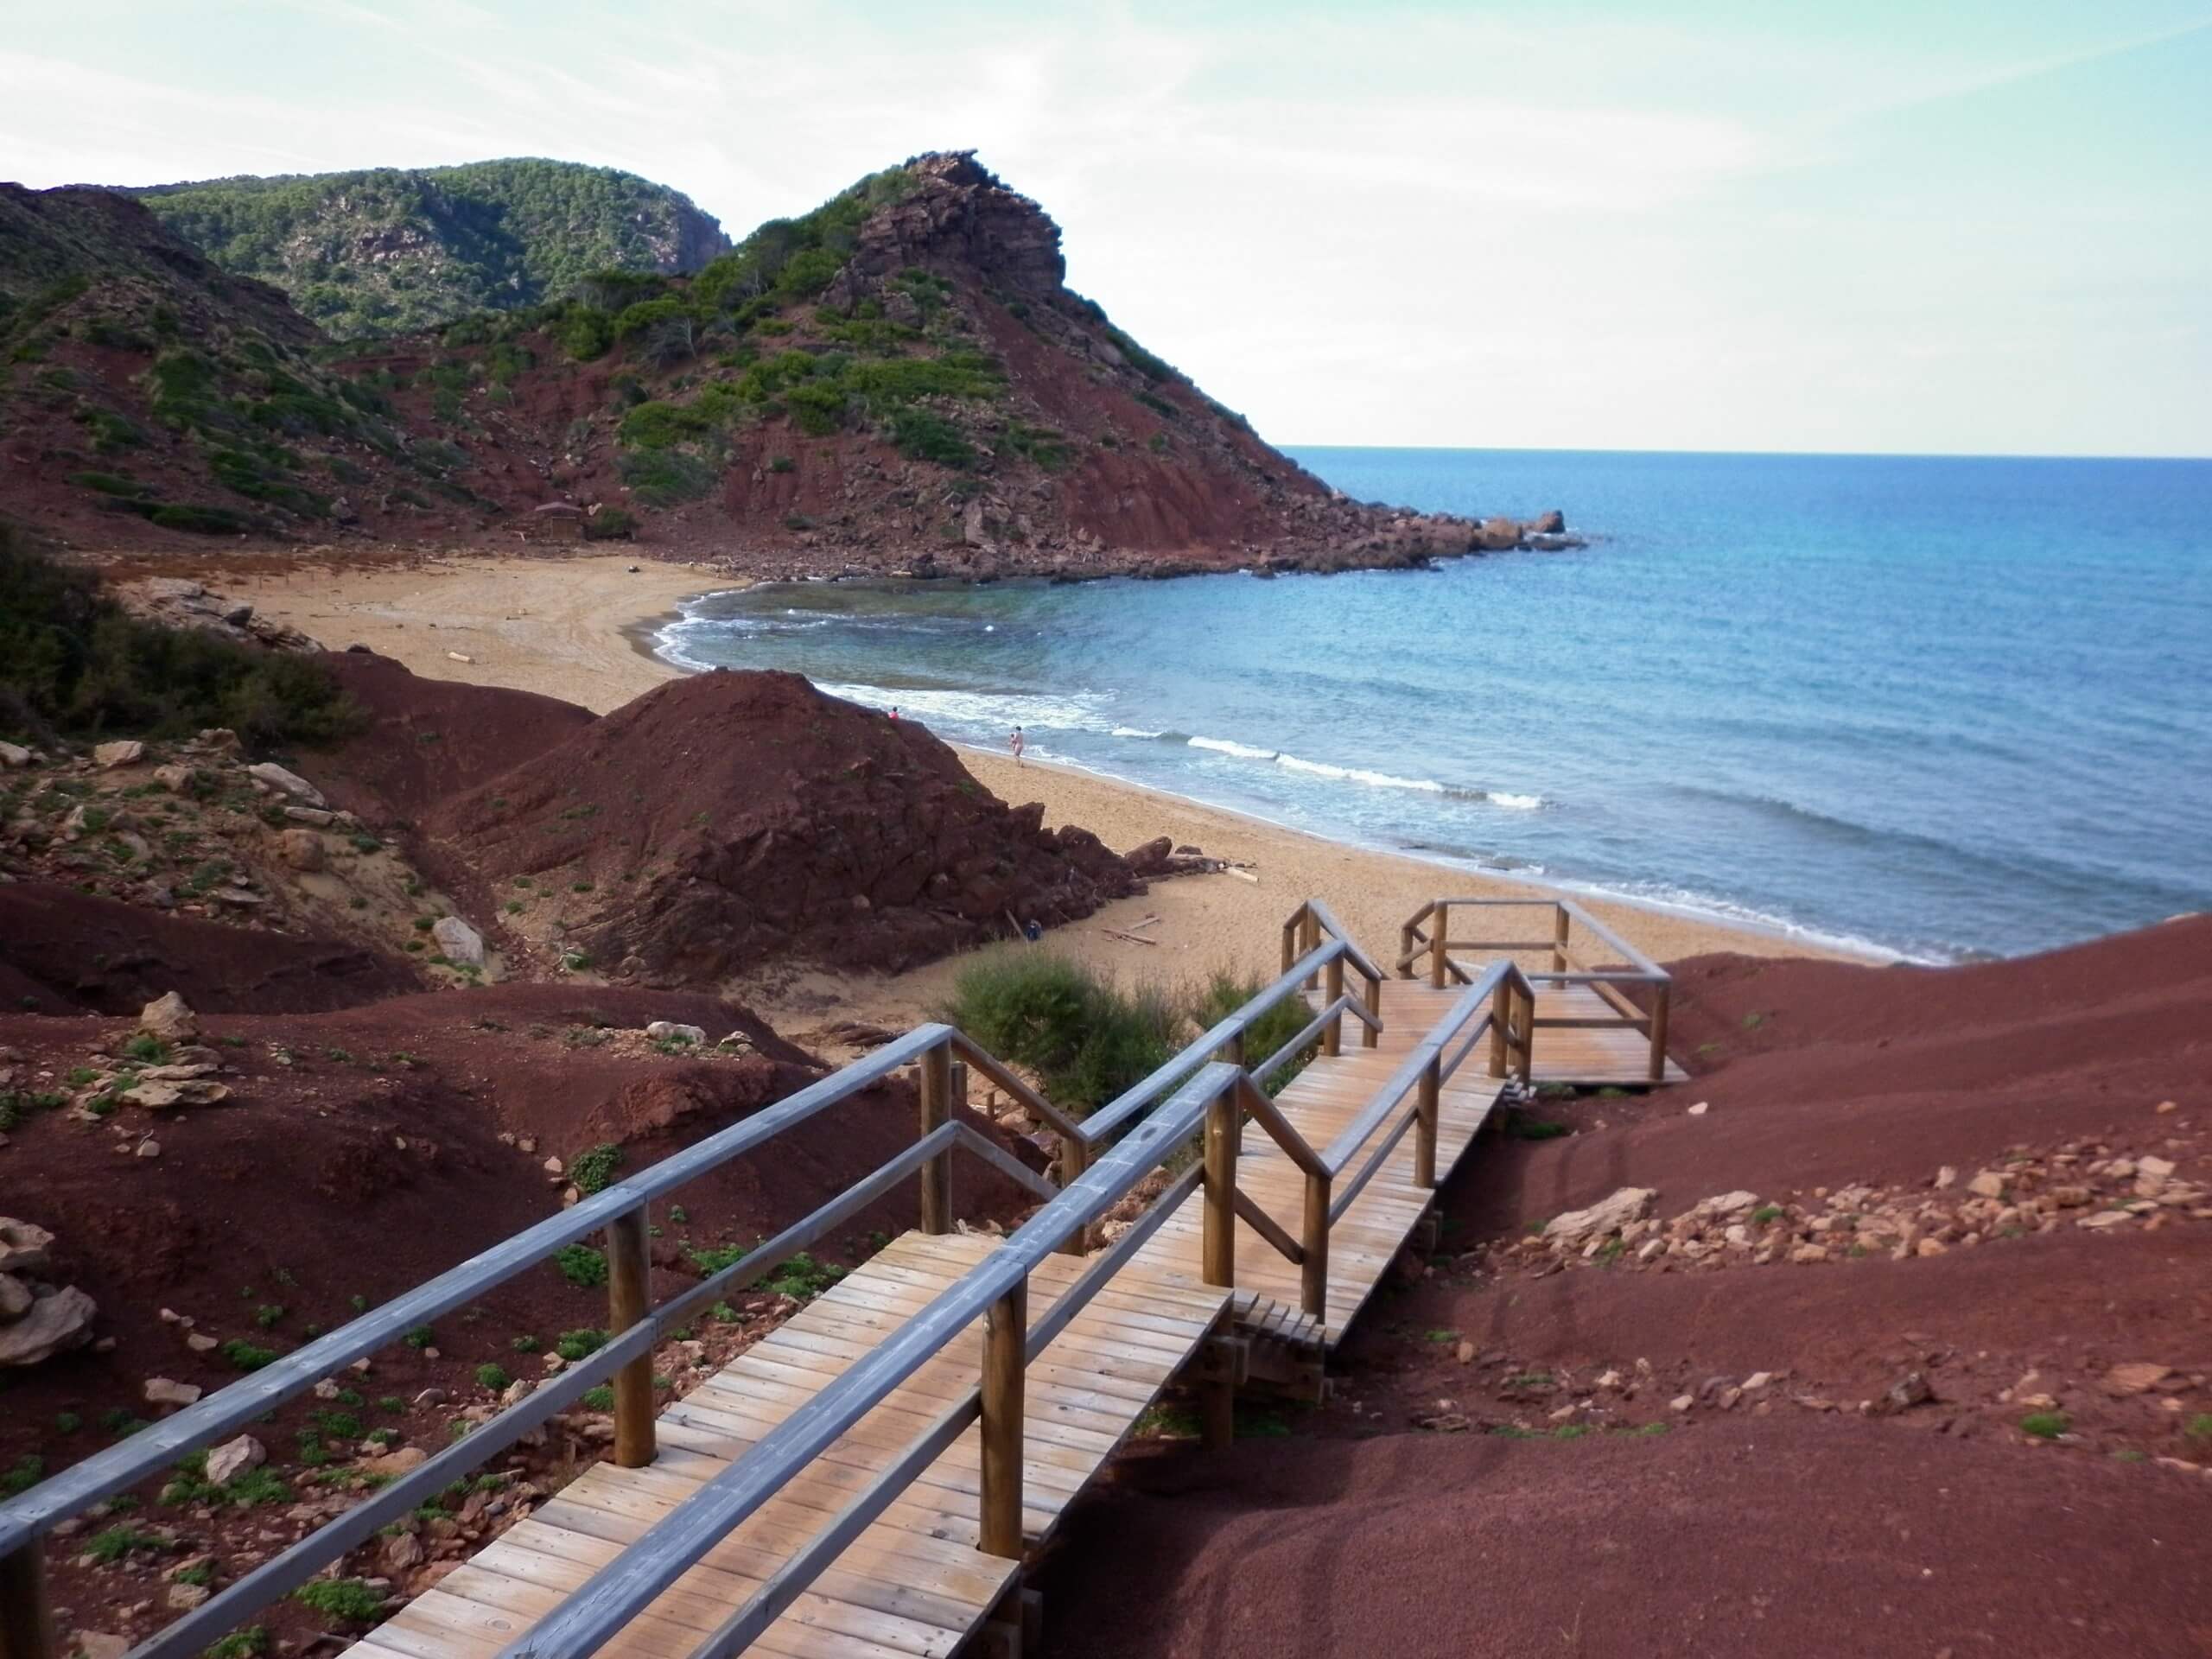 Aproaching the red sand beach in Minorca